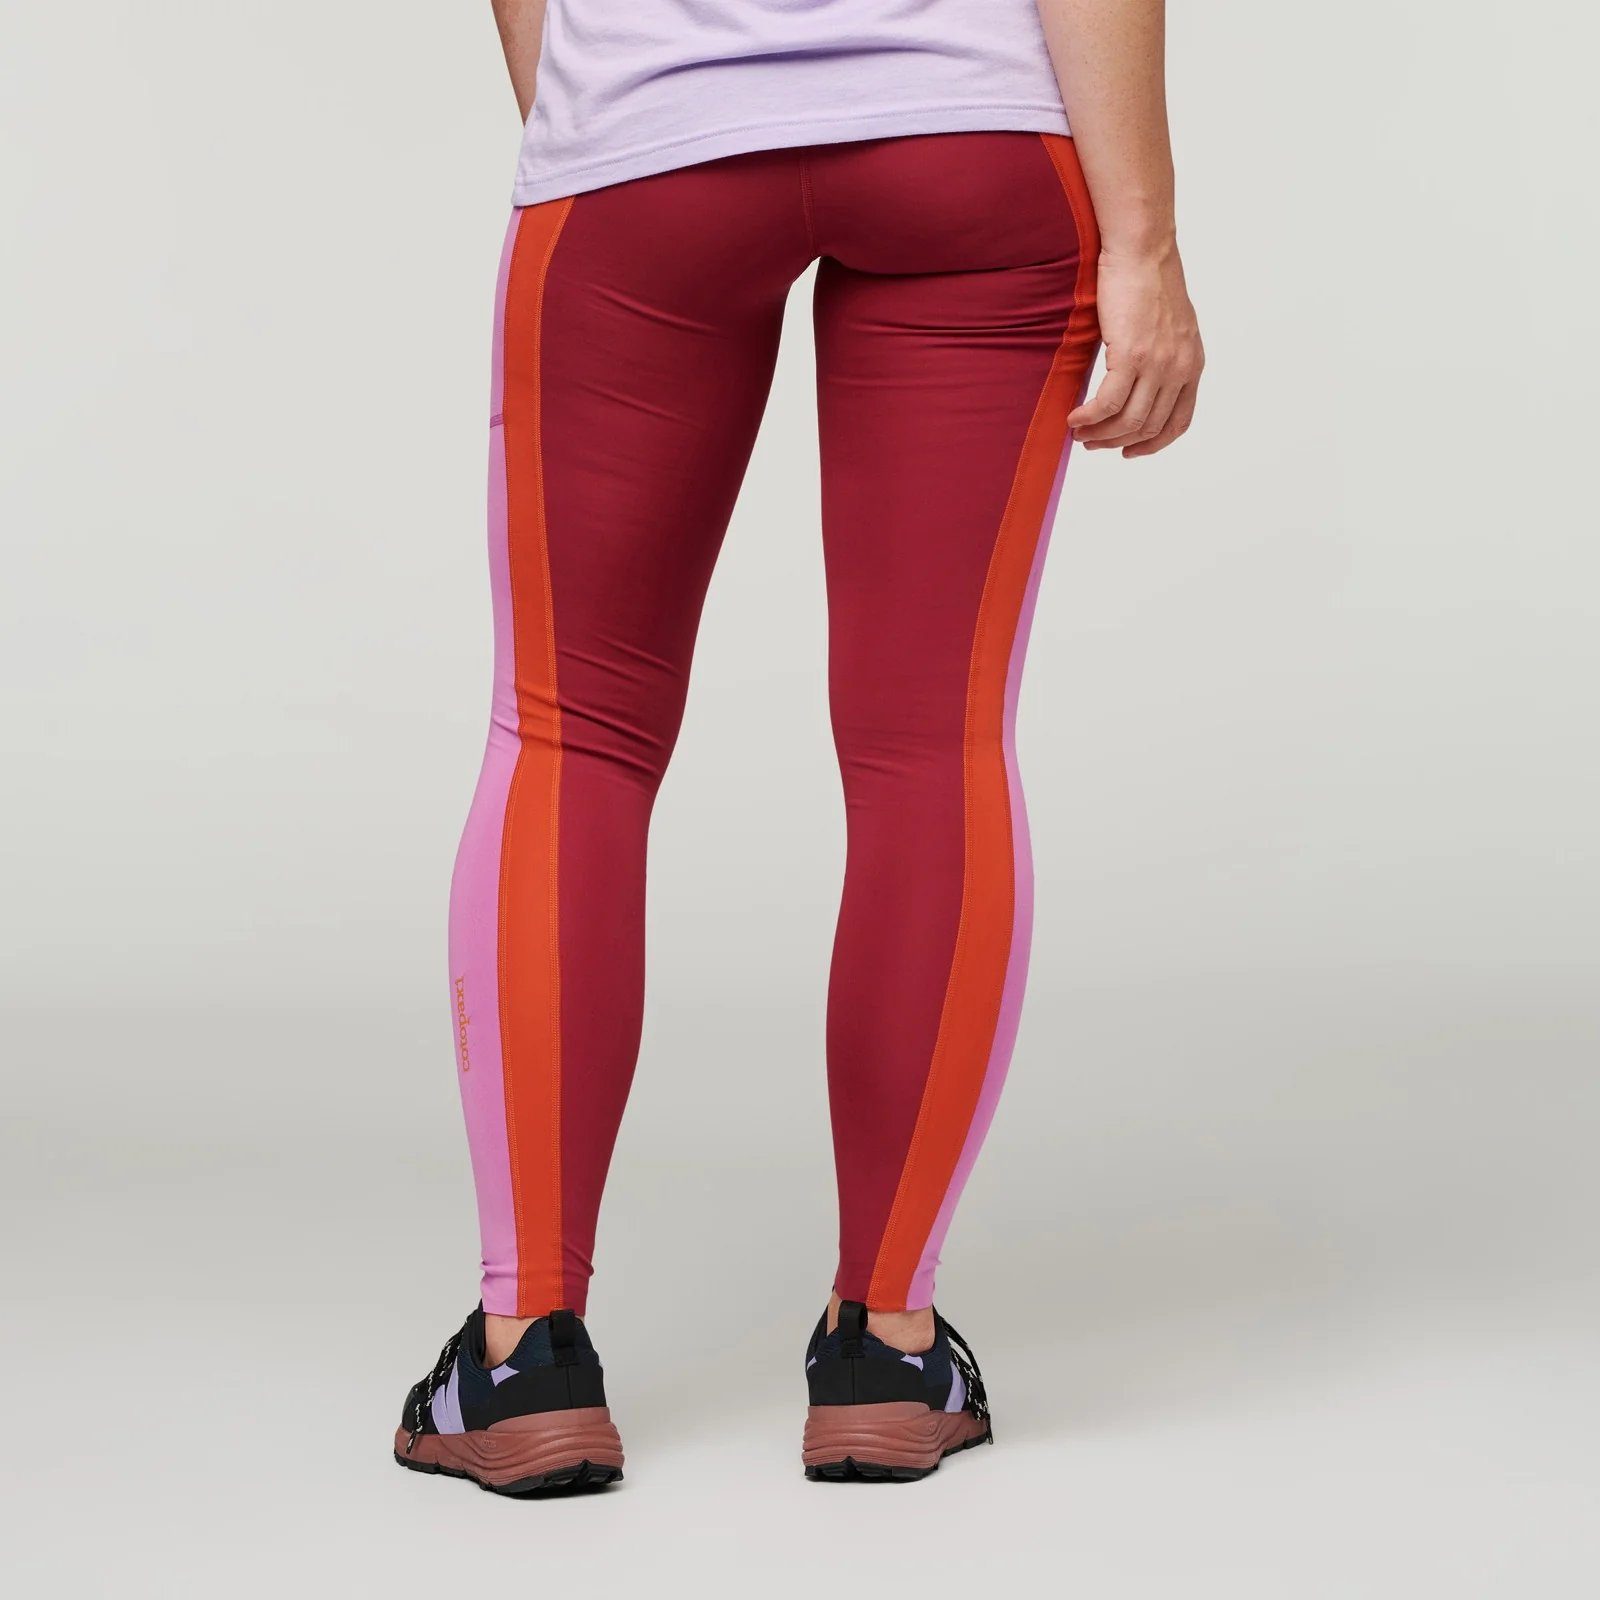 Cotopaxi Tight Roso Travel Raspberry Outdoorhose